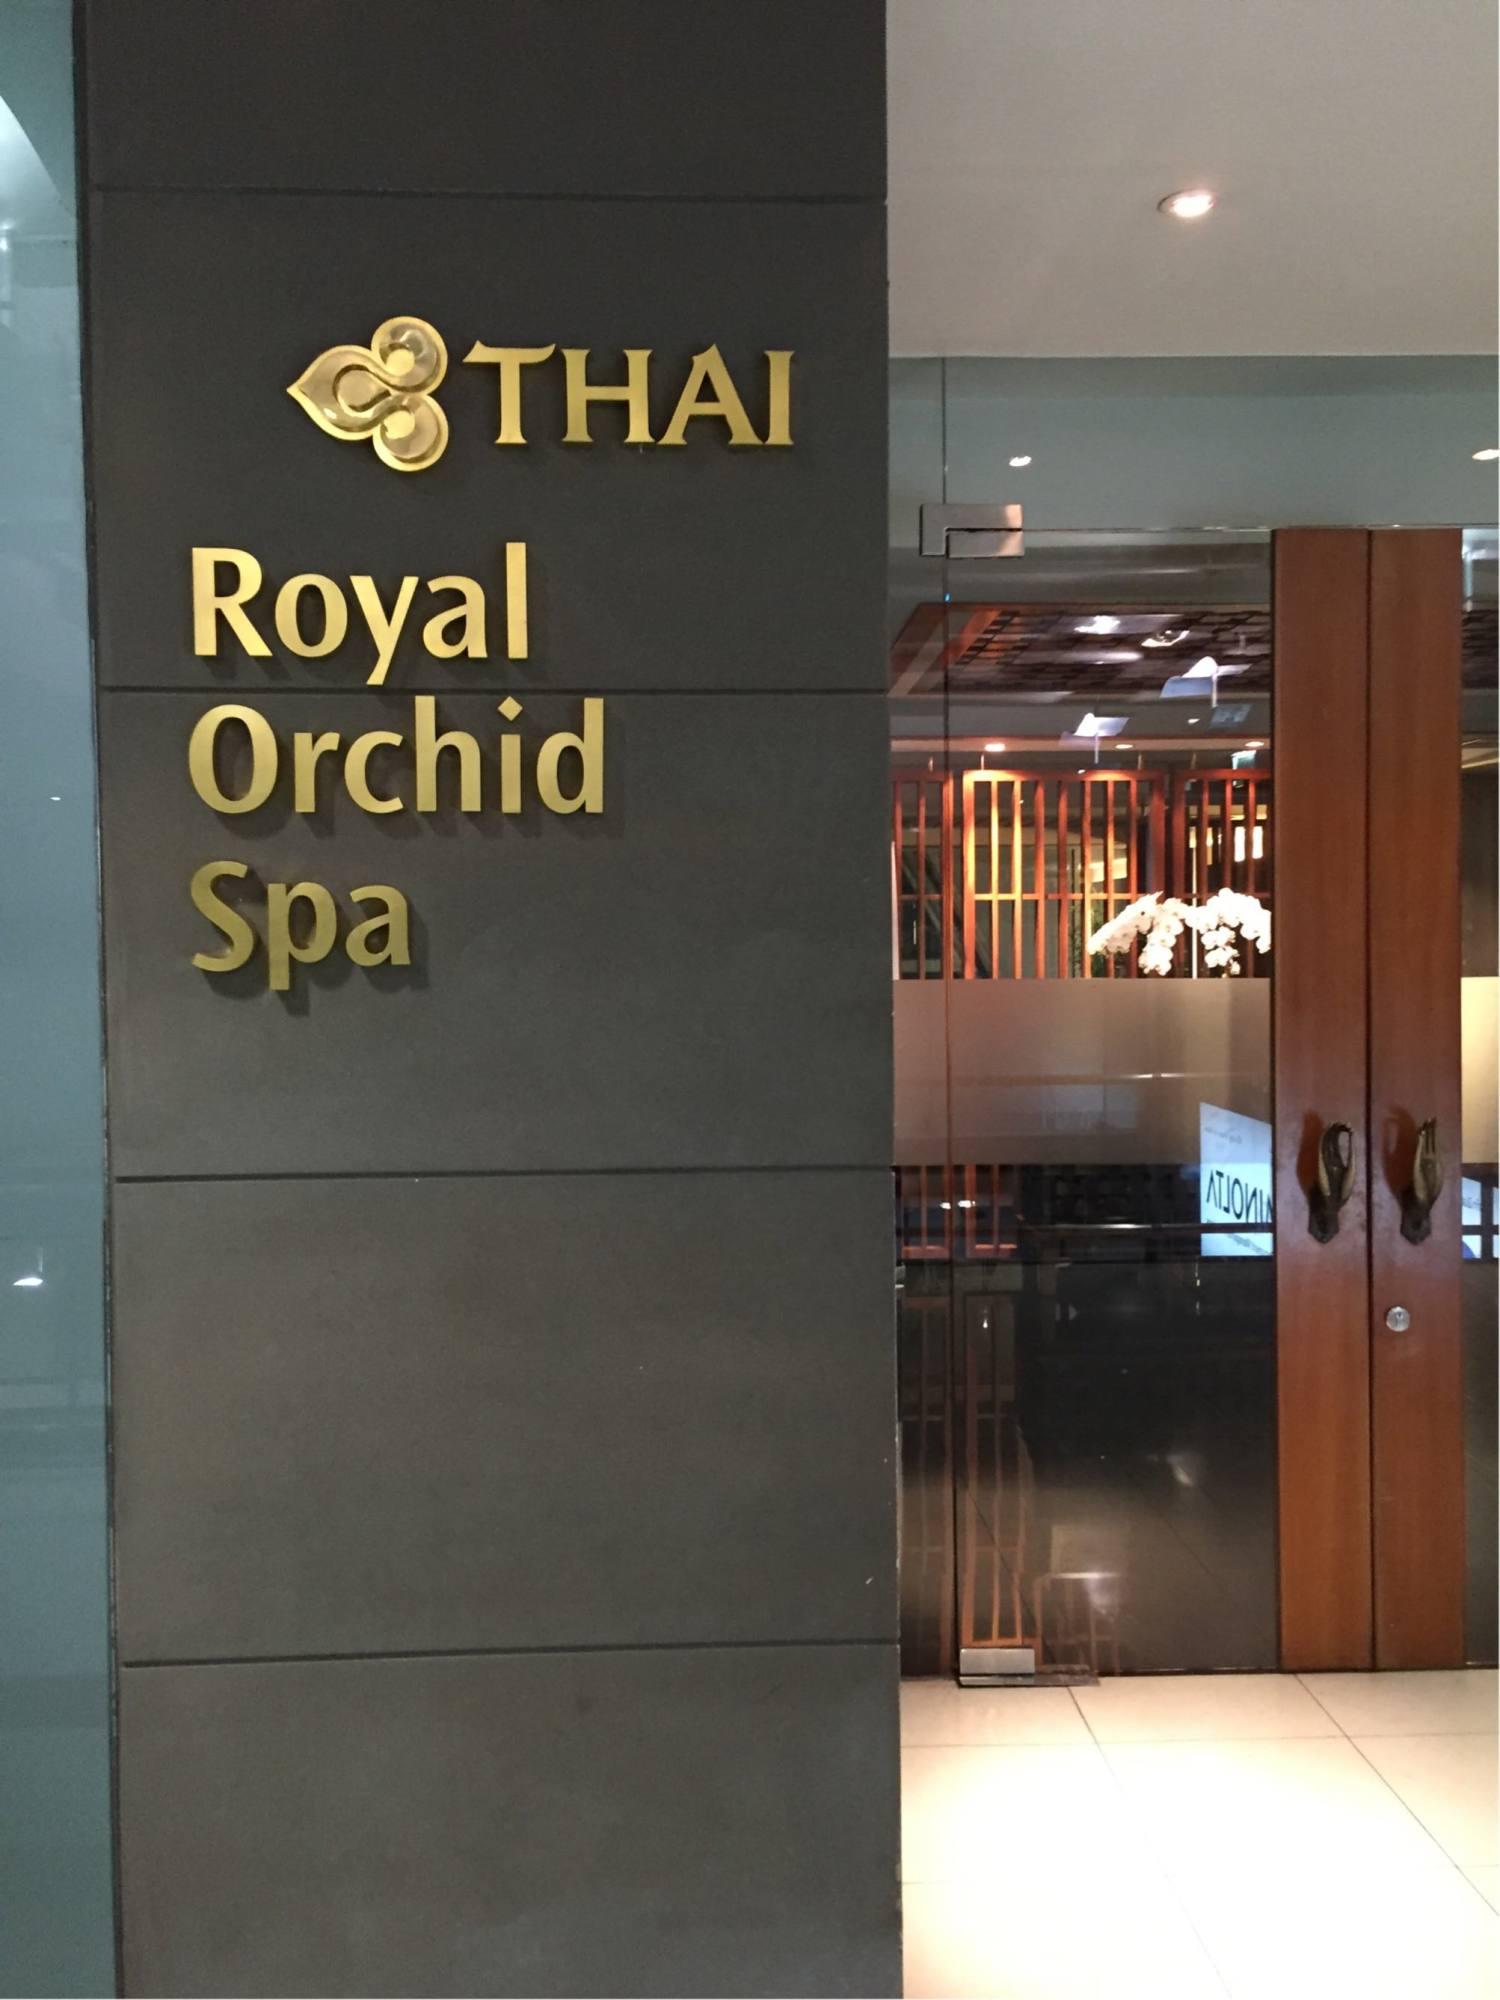 Thai Airways Royal Orchid Spa  image 7 of 25